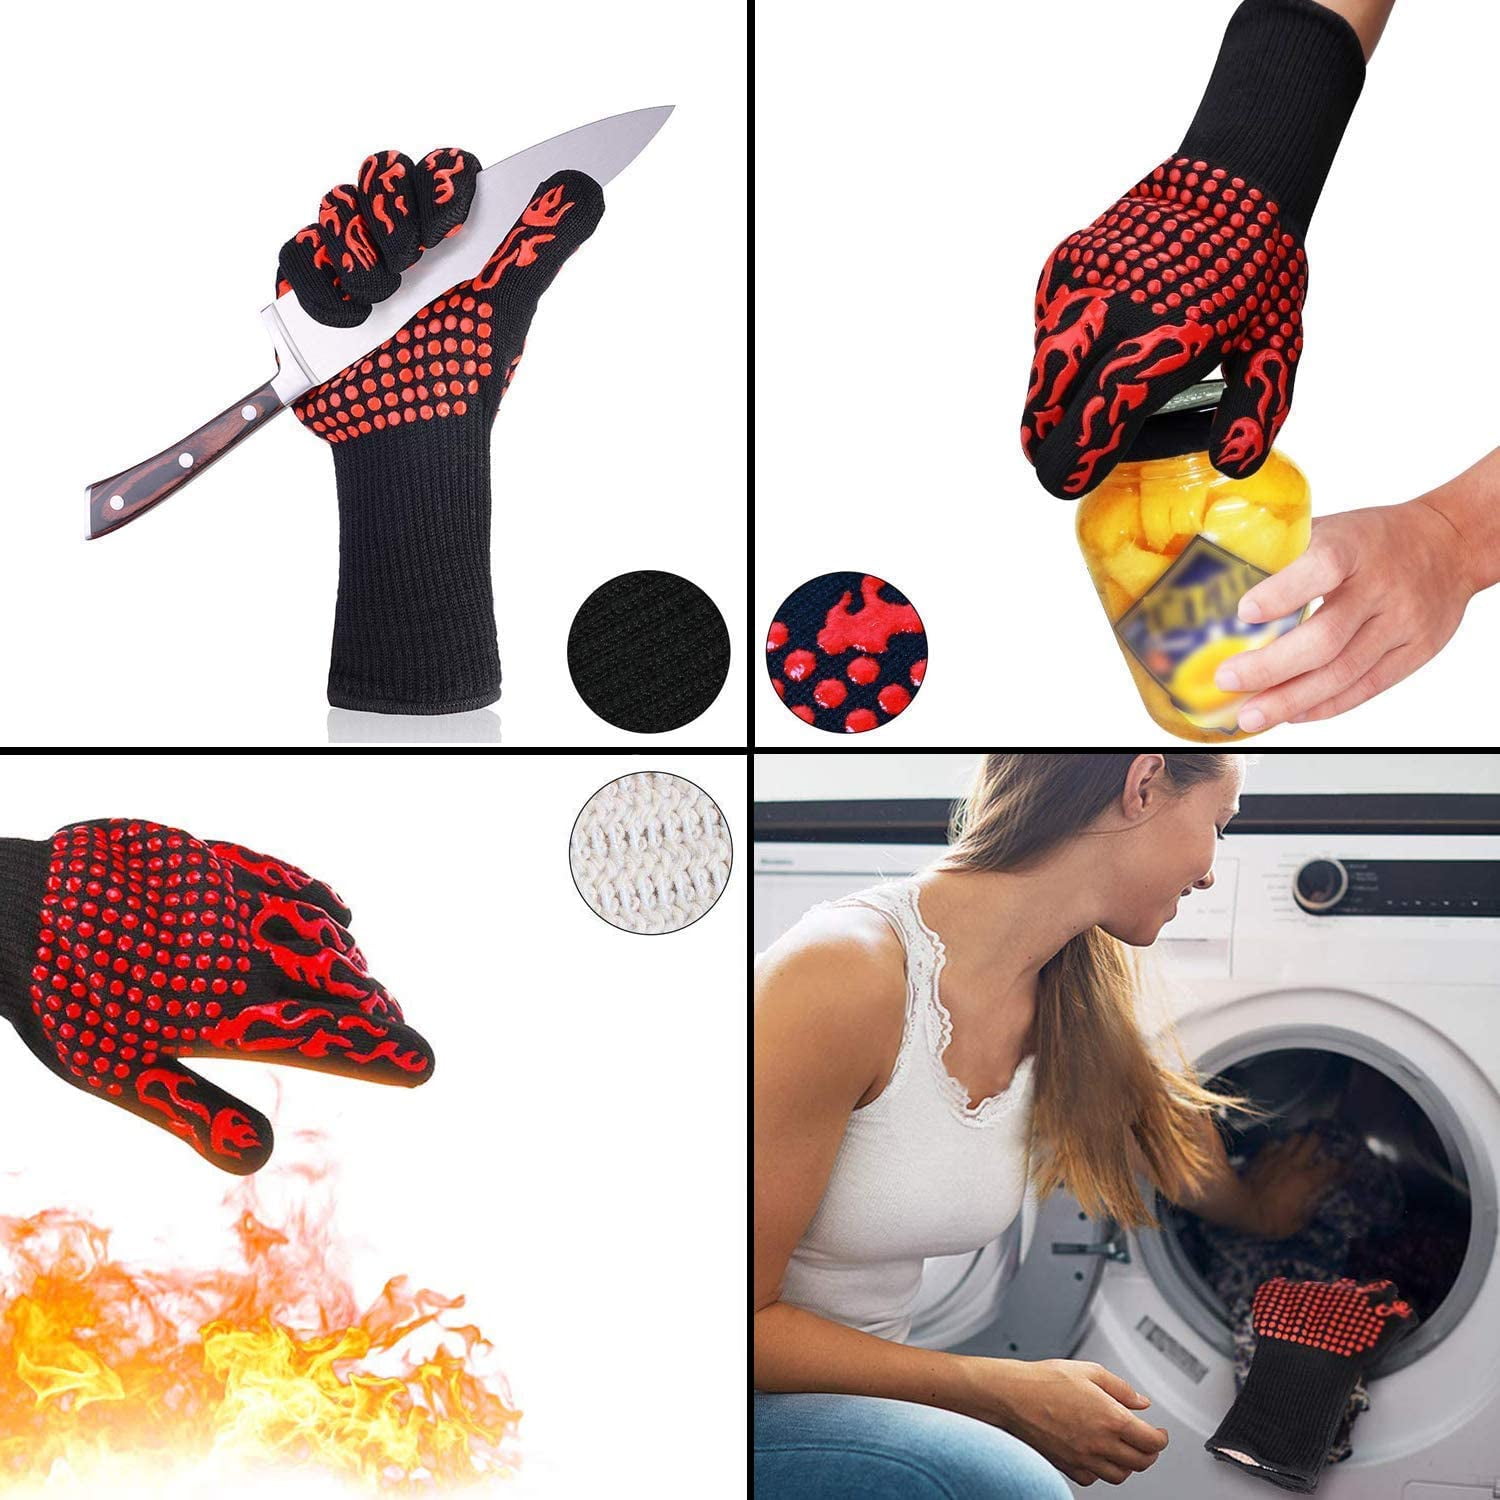 Comsmart BBQ Gloves, 1472 Degree F Heat Resistant Grilling Gloves Silicone  Non-Slip Oven Gloves Long Kitchen Gloves for Barbecue, Cooking, Baking,  Cutting